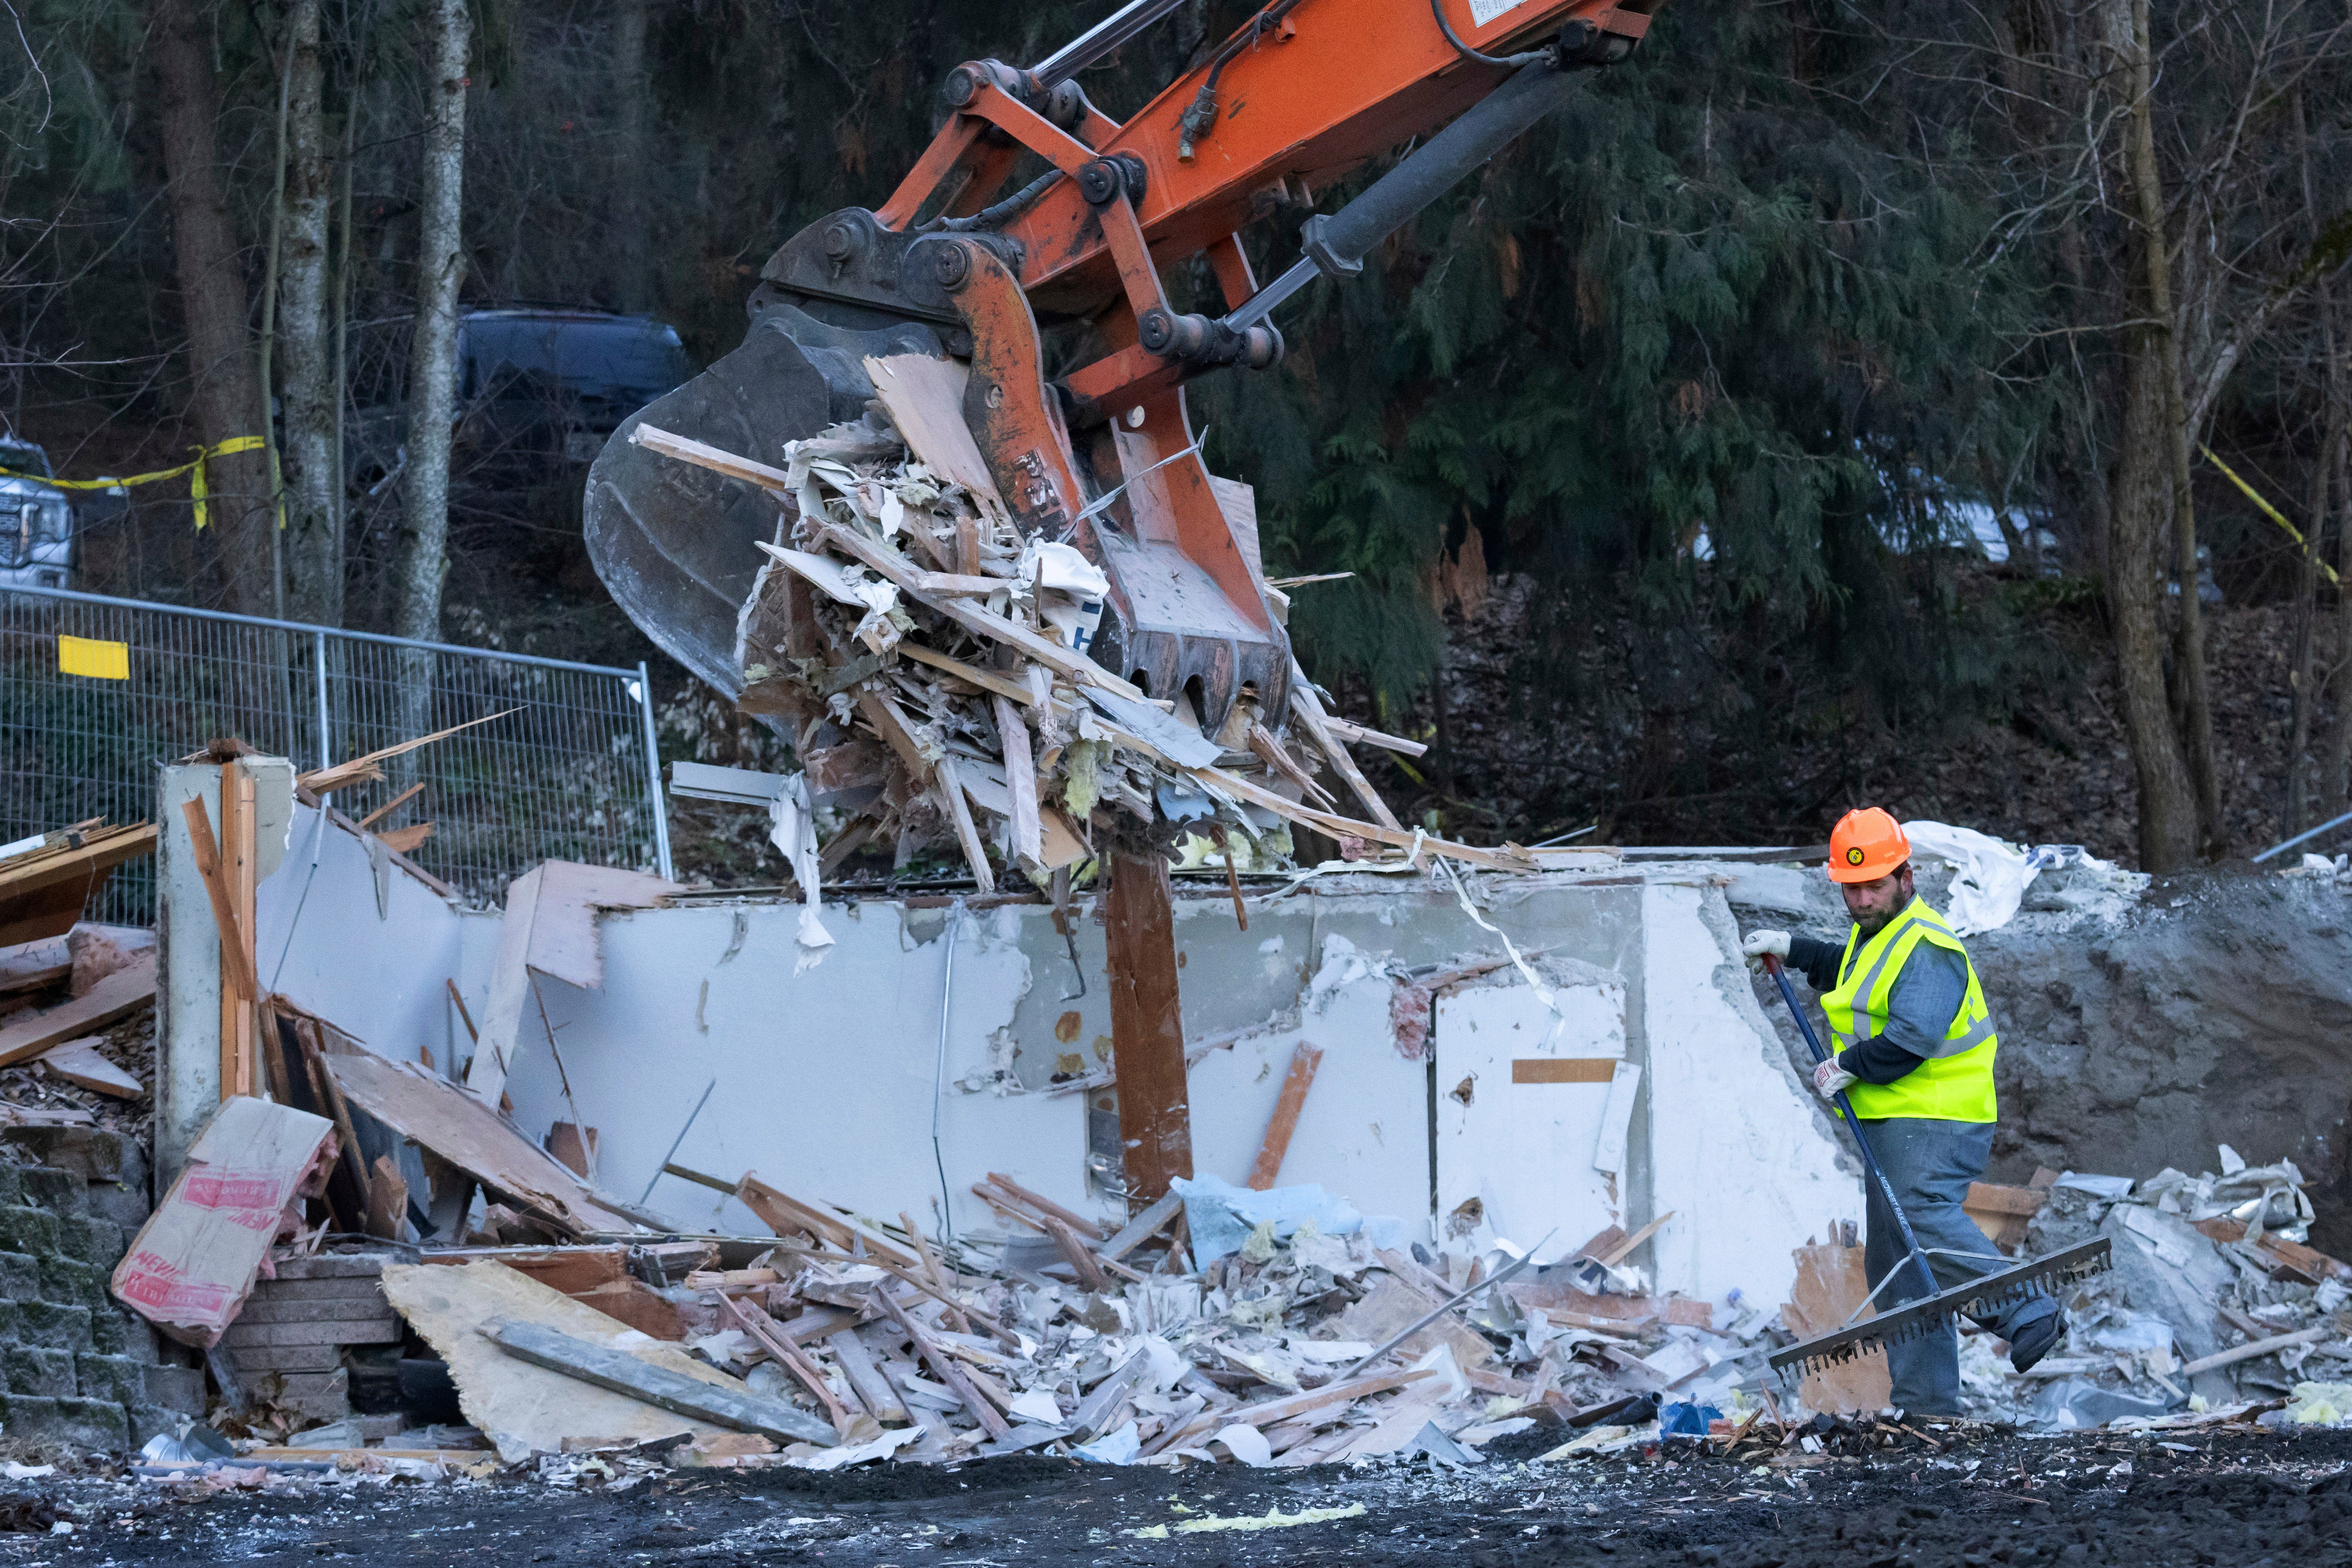 A worker rakes debris during a pause in the use of heavy equipment to demolish the house where four University of Idaho students were killed in 2022